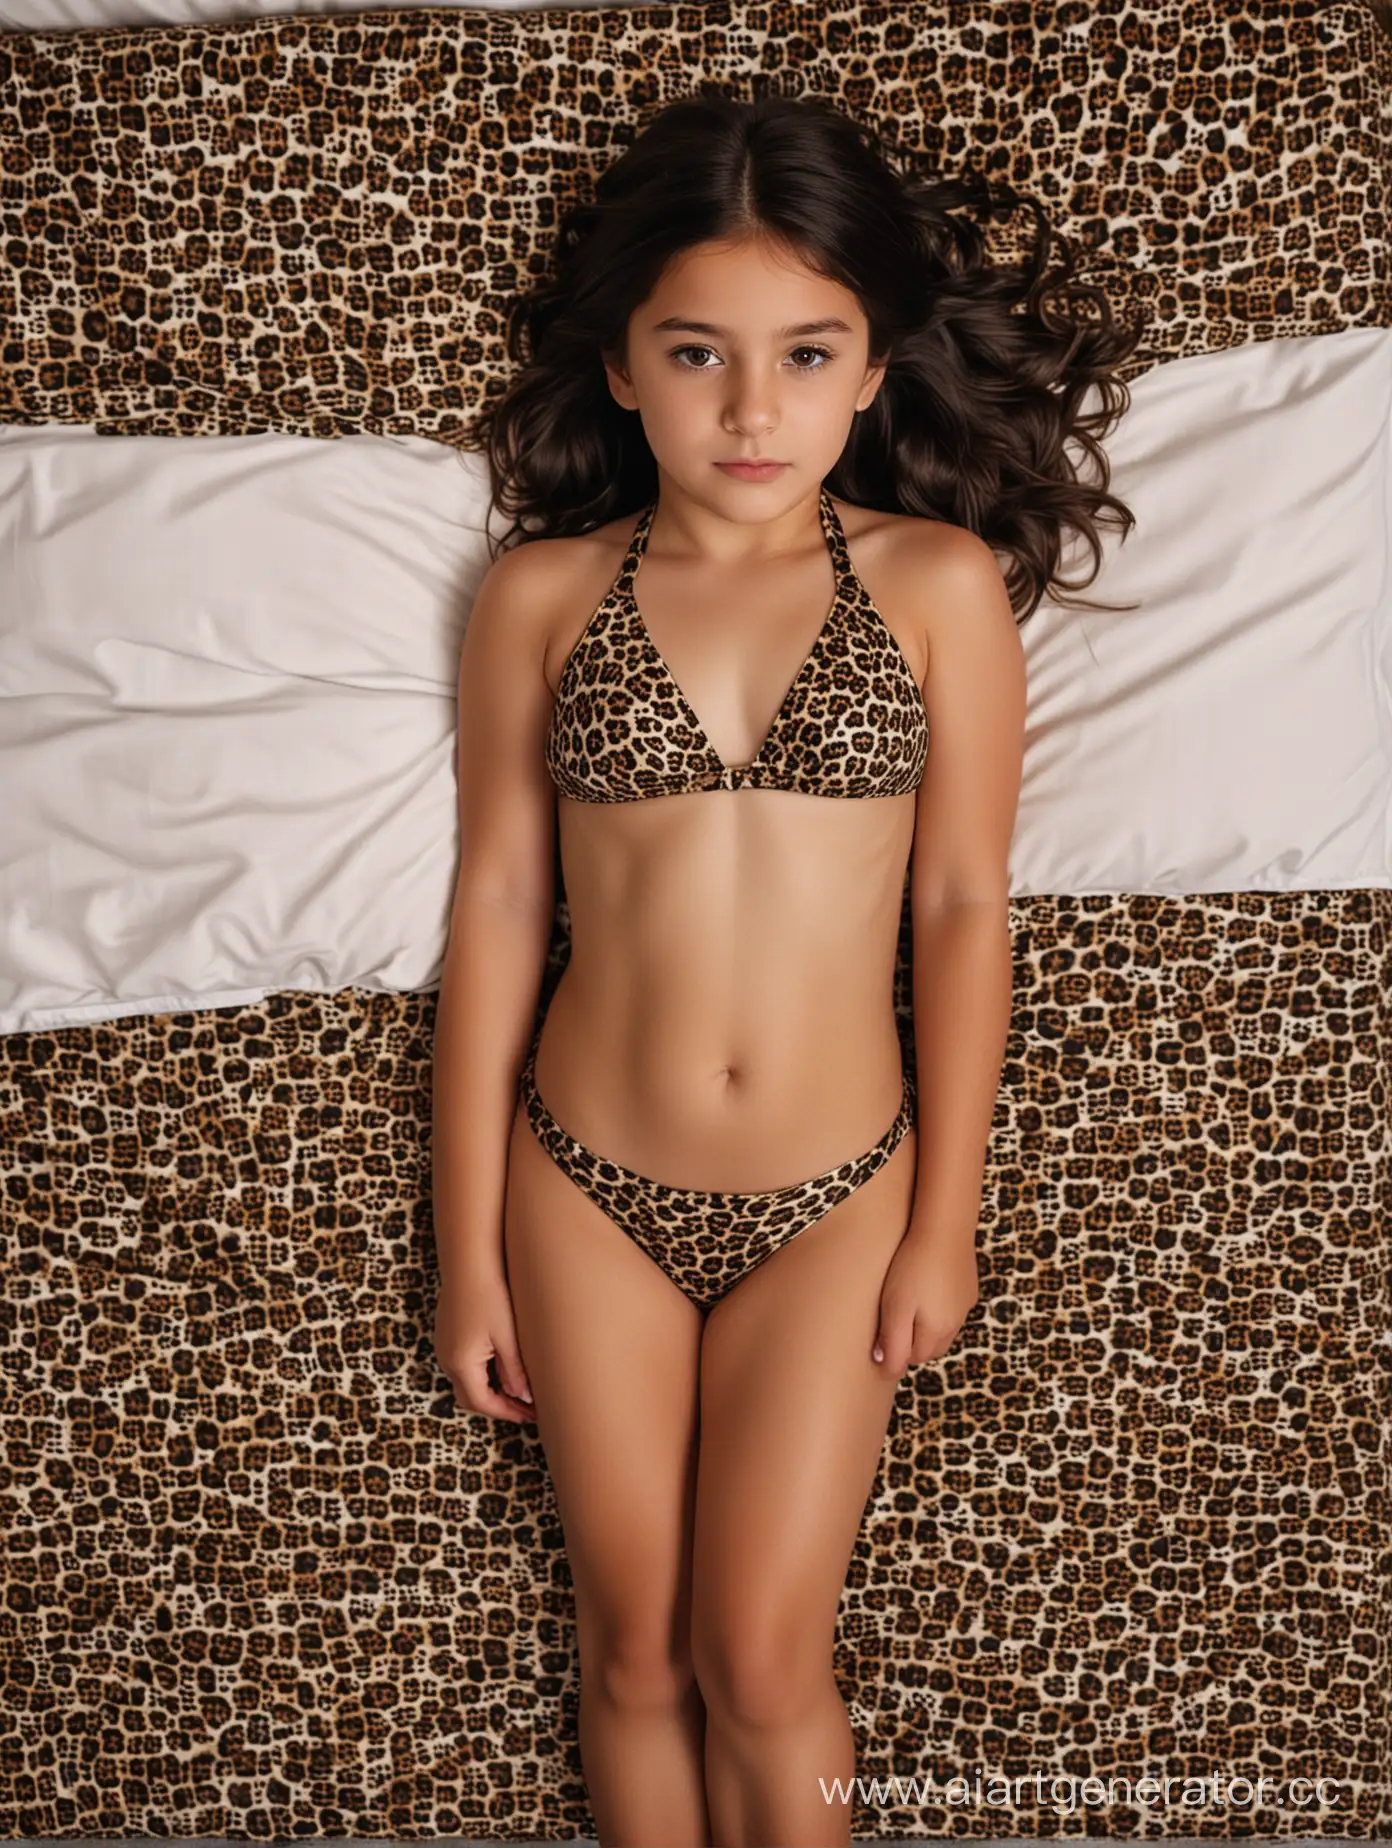 Turkish-Girl-in-Leopard-Patterned-Bikini-Expressing-Pain-on-Bed